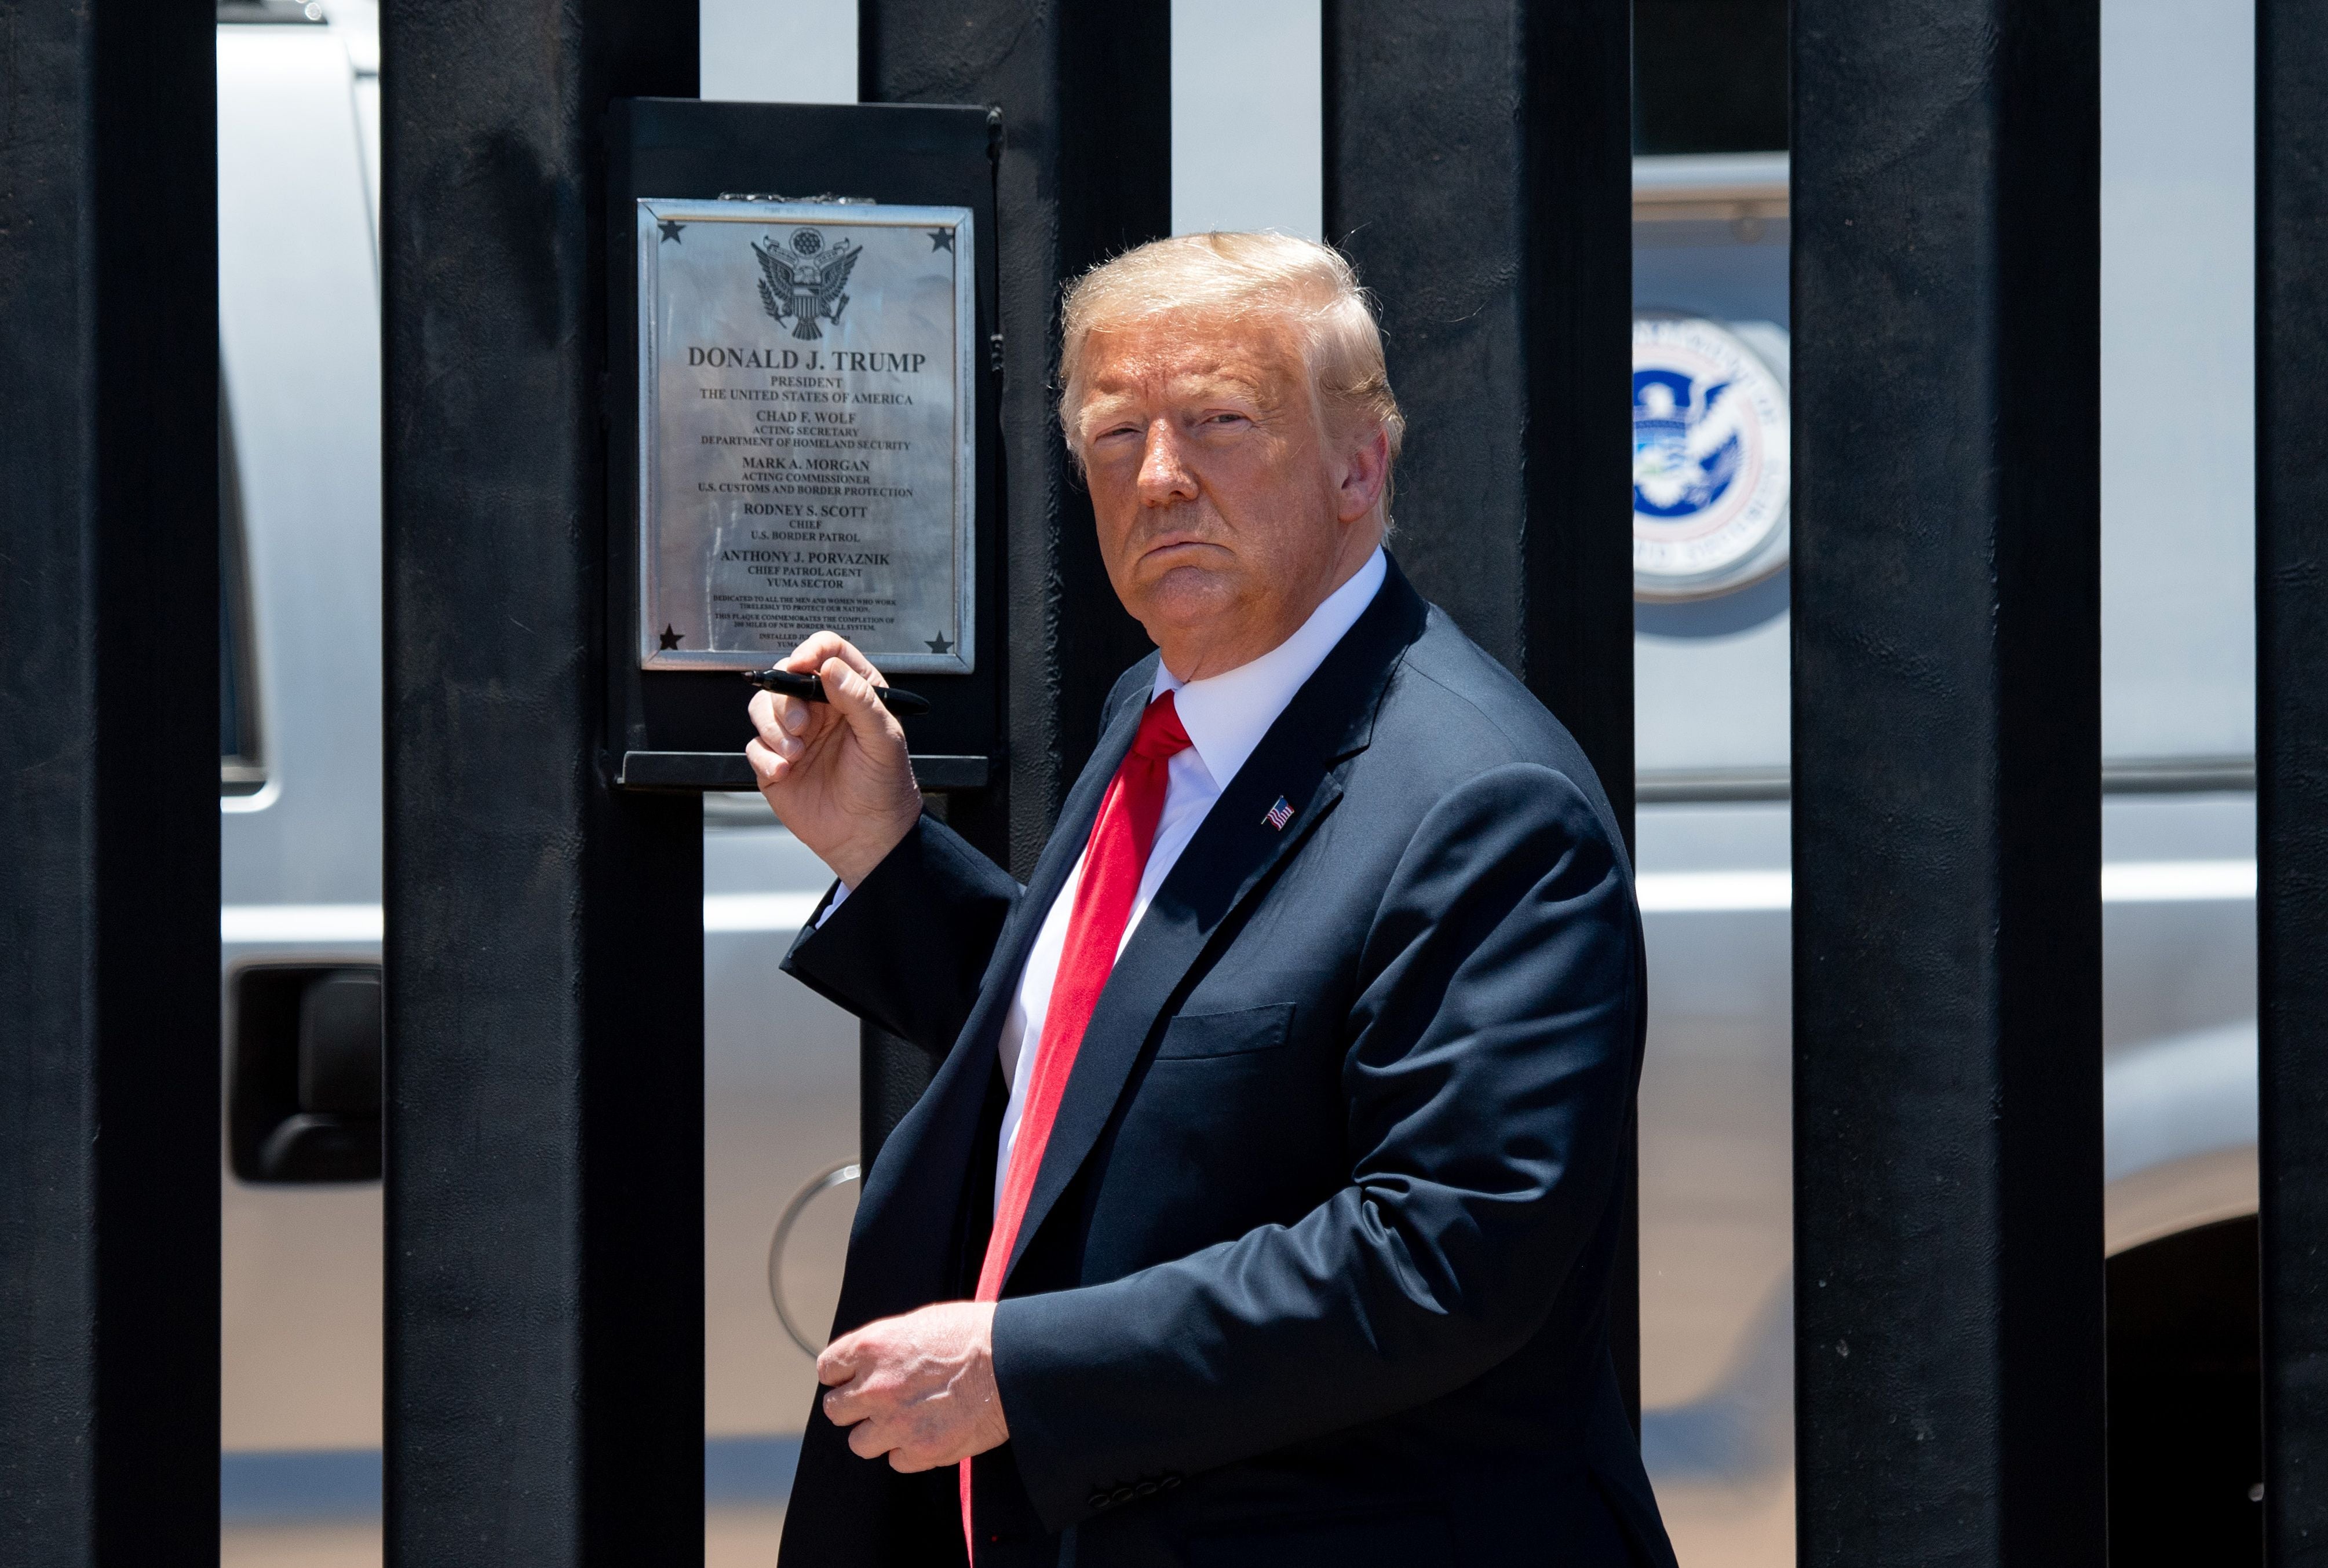 <p>TOPSHOT - US President Donald Trump looks on before signing a plaque as he participates in a ceremony commemorating the 200th mile of border wall at the international border with Mexico in San Luis, Arizona, June 23, 2020. (Photo by SAUL LOEB / AFP) (Photo by SAUL LOEB/AFP via Getty Images)</p>